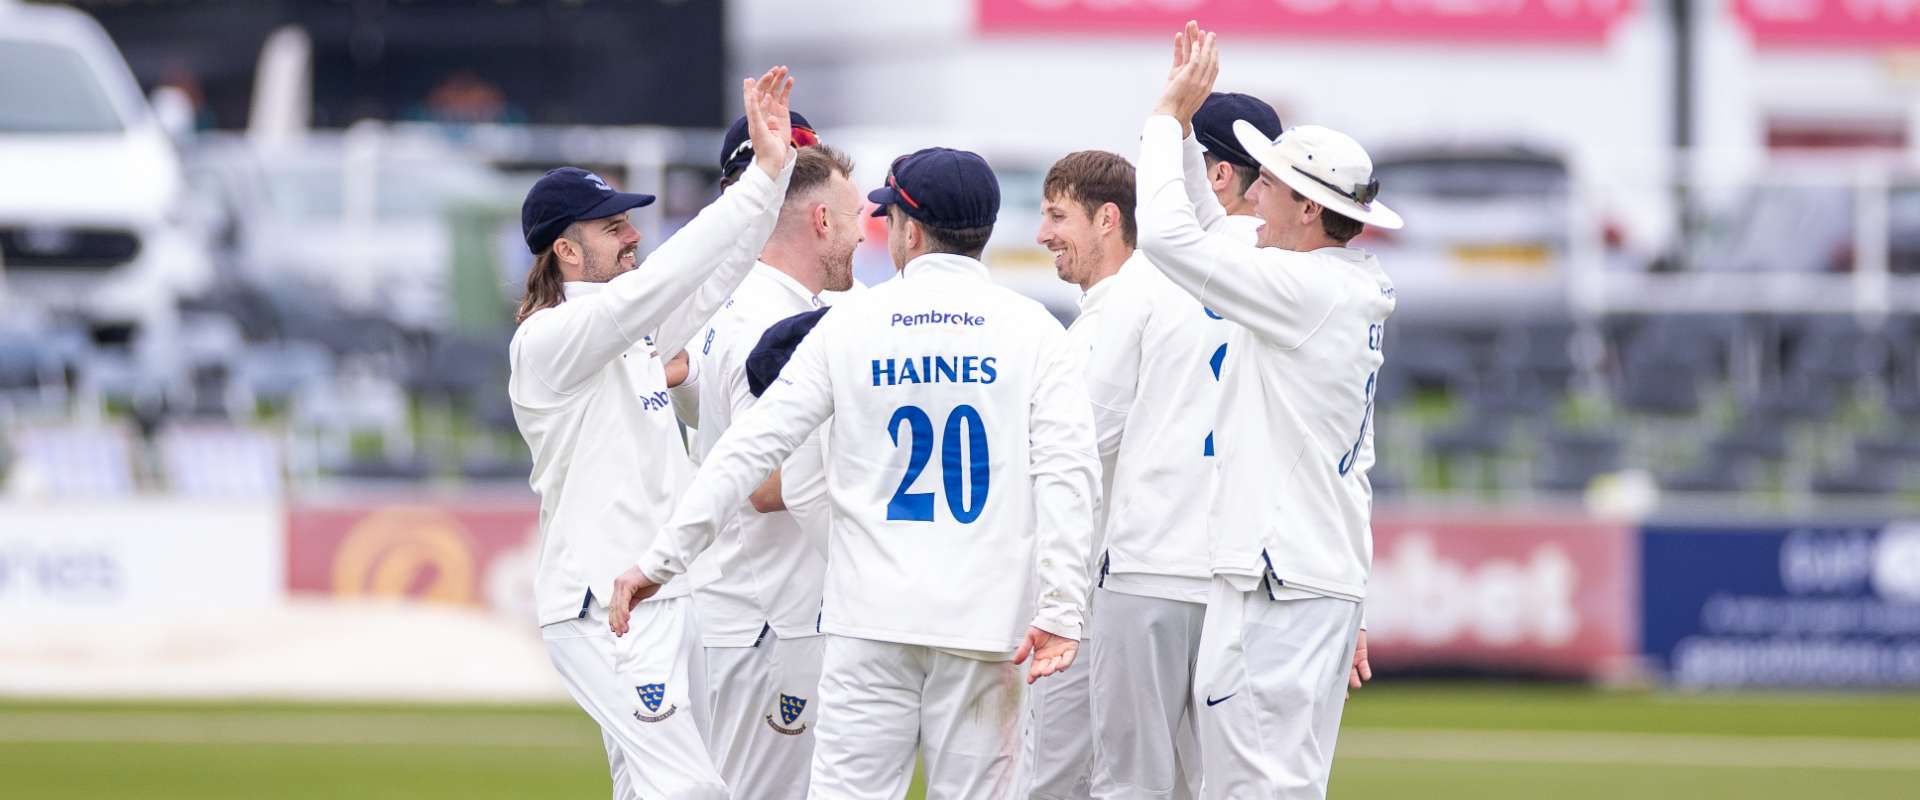 Sussex players celebrate a wicket against Northamptonshire